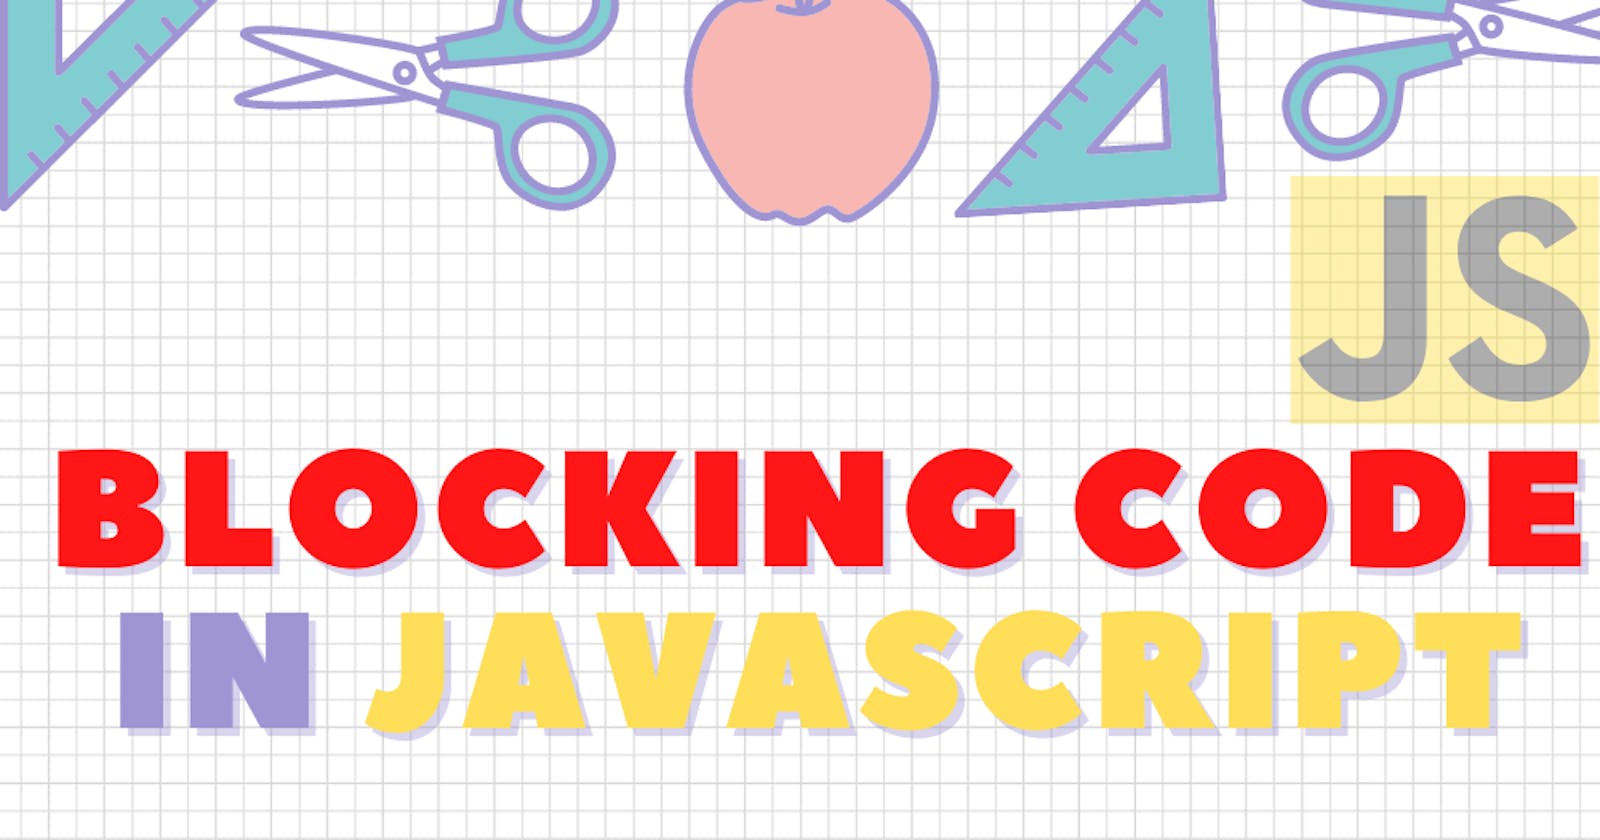 A short guide to Blocking Code in Javascript